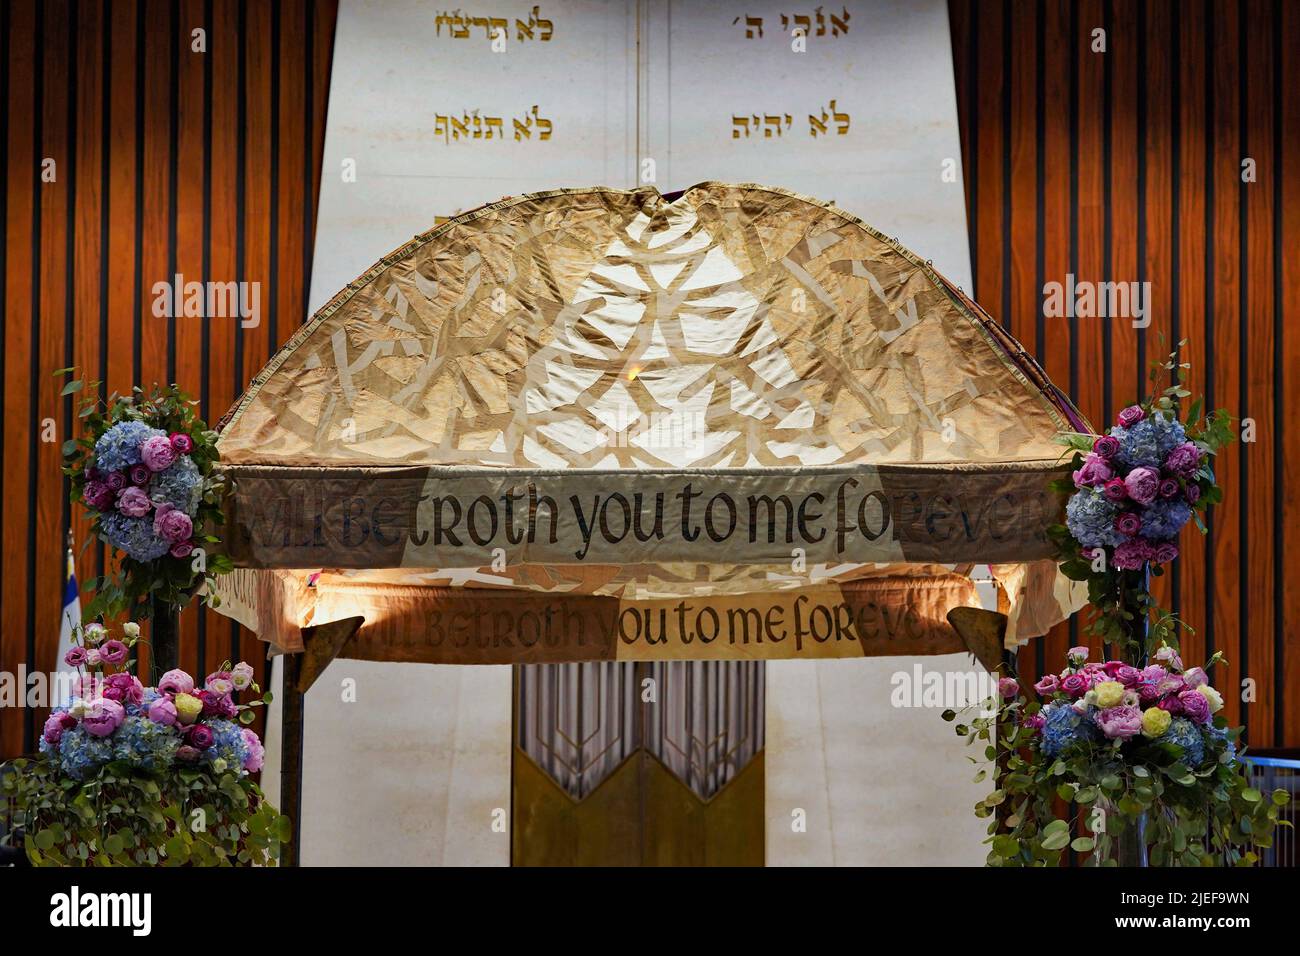 Traditional Jewish wedding canopy with biblical quotation from the Book of Hoshea, 'I will betroth you to me forever' Stock Photo